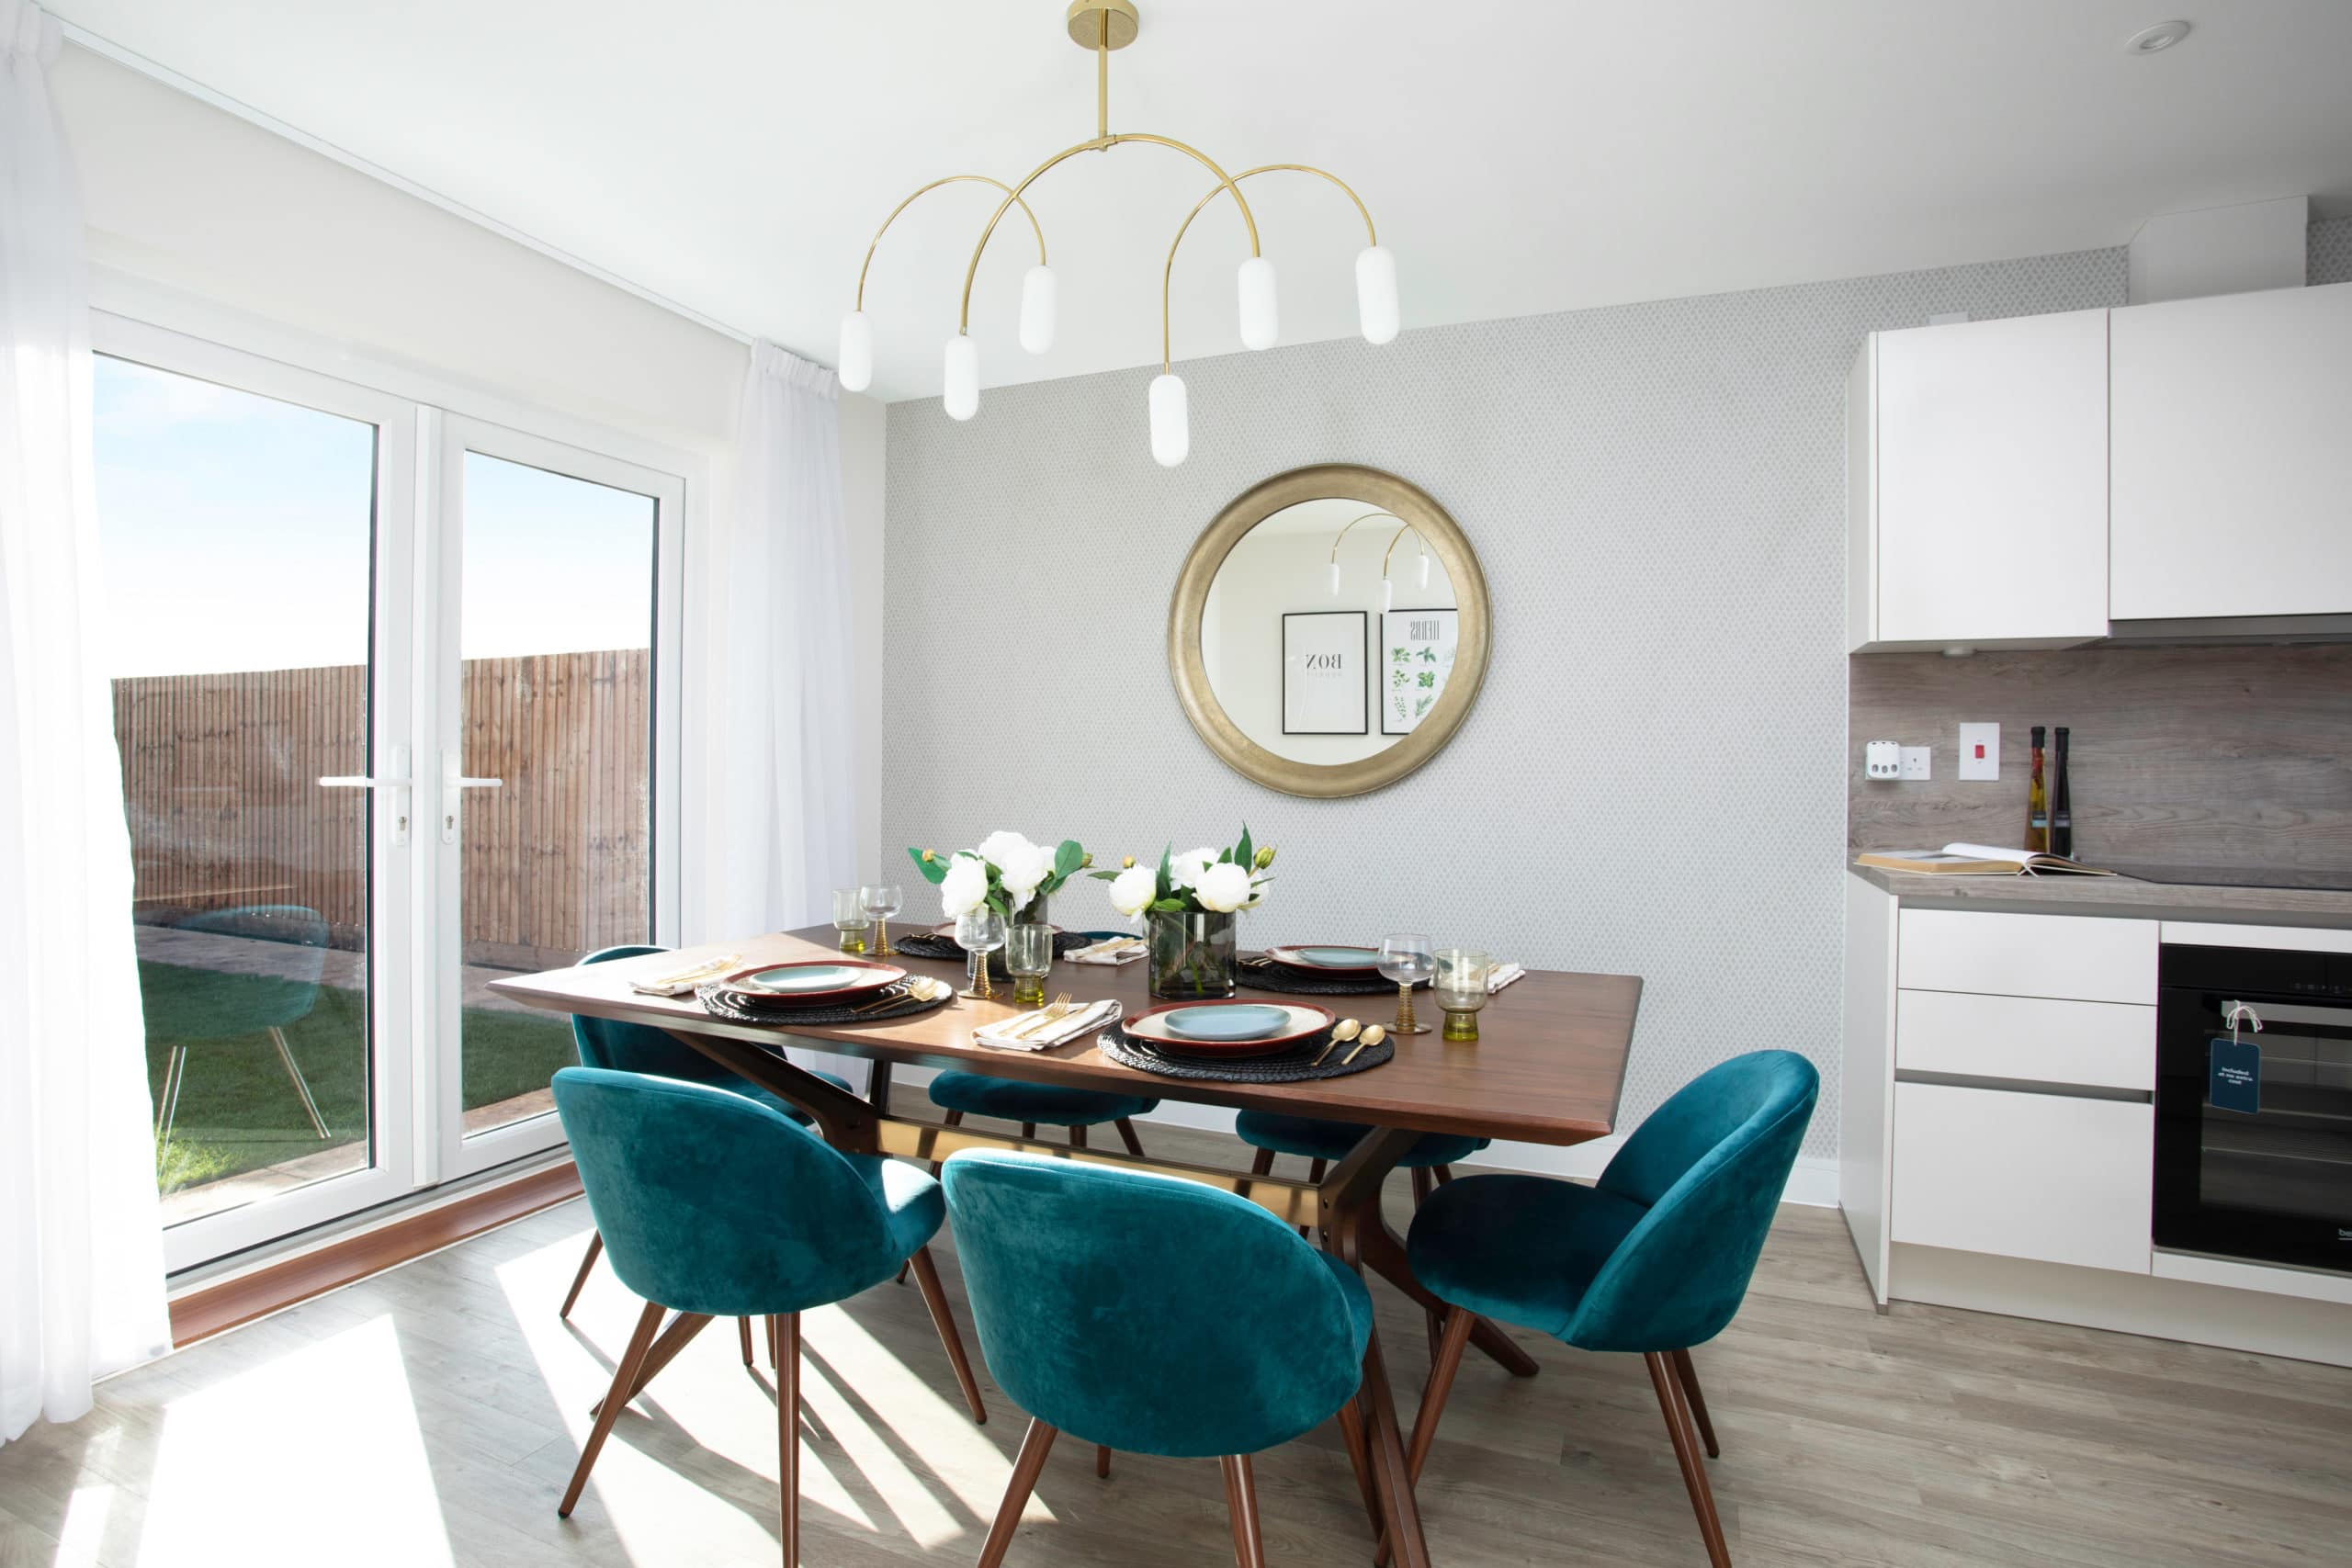 Show home photography from L&Q - Shared Ownership homes available at Share to Buy